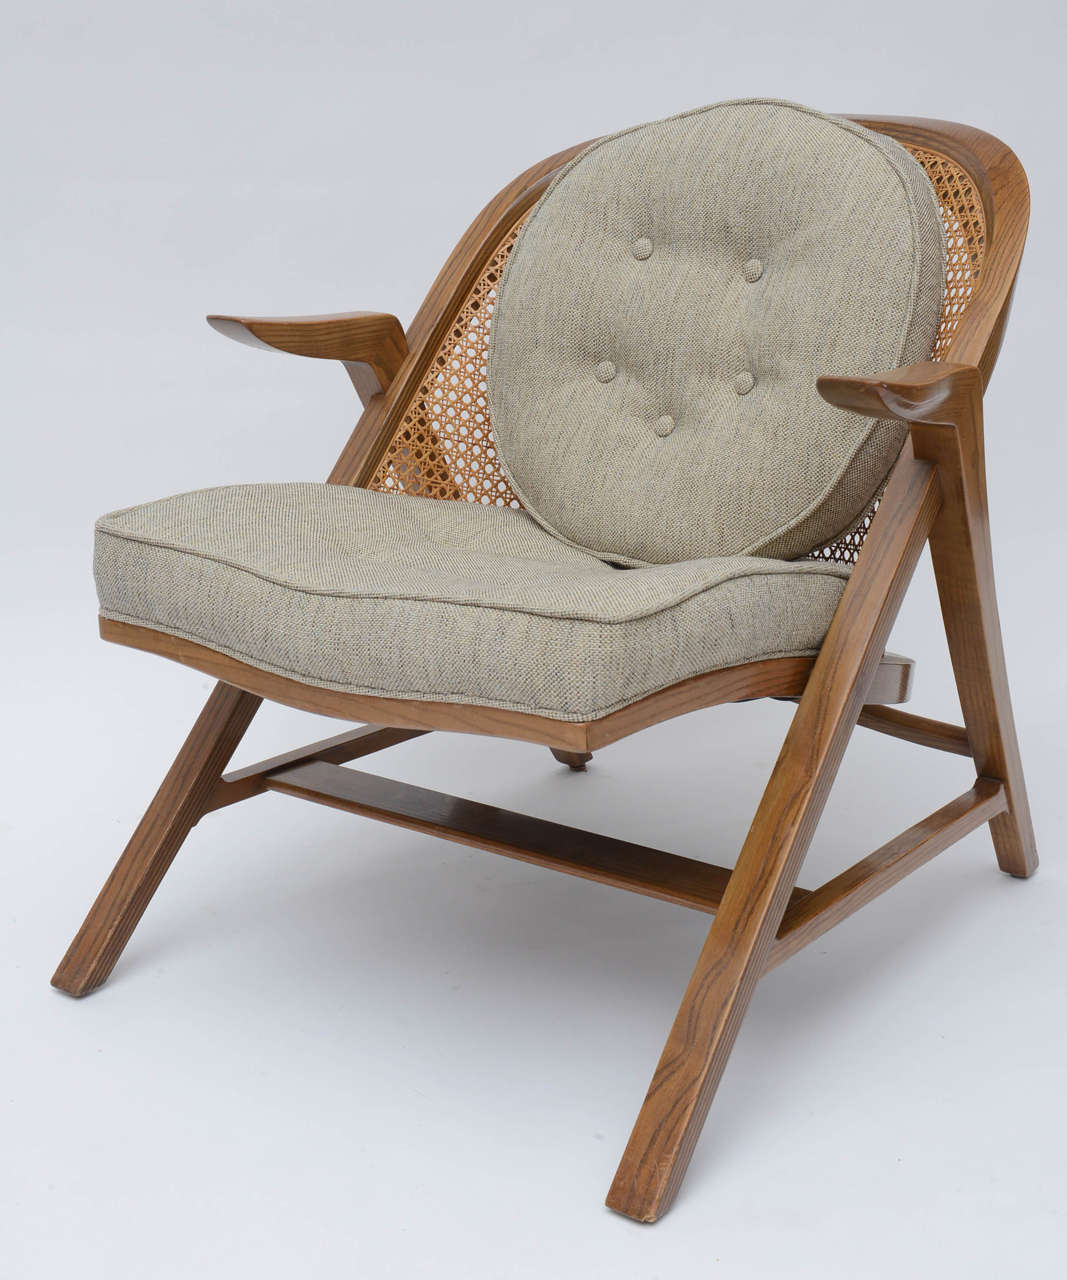 Mid-20th Century Edward Wormley A-Frame Lounge Chairs